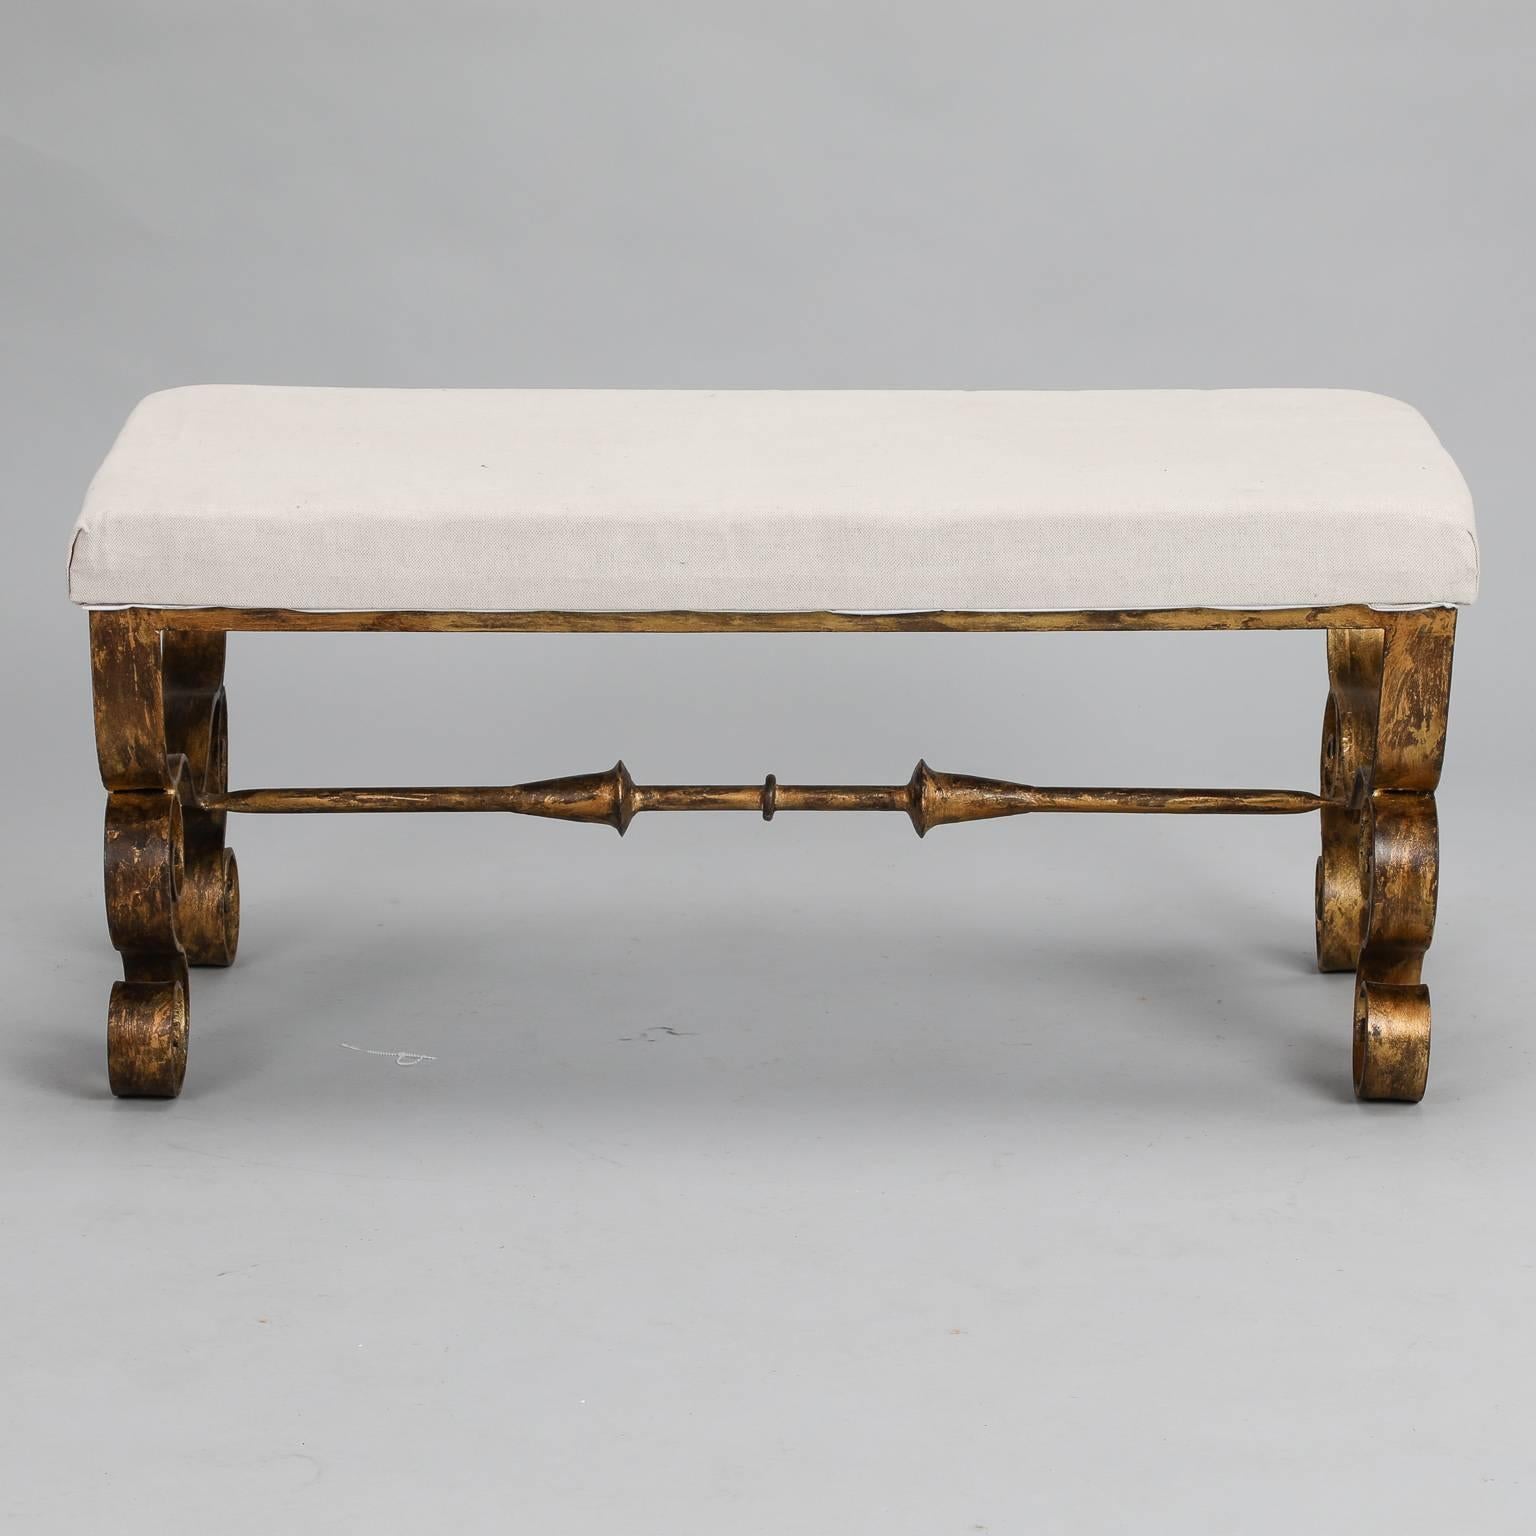 20th Century Upholstered Bench with Scrolled Gilt Metal Legs